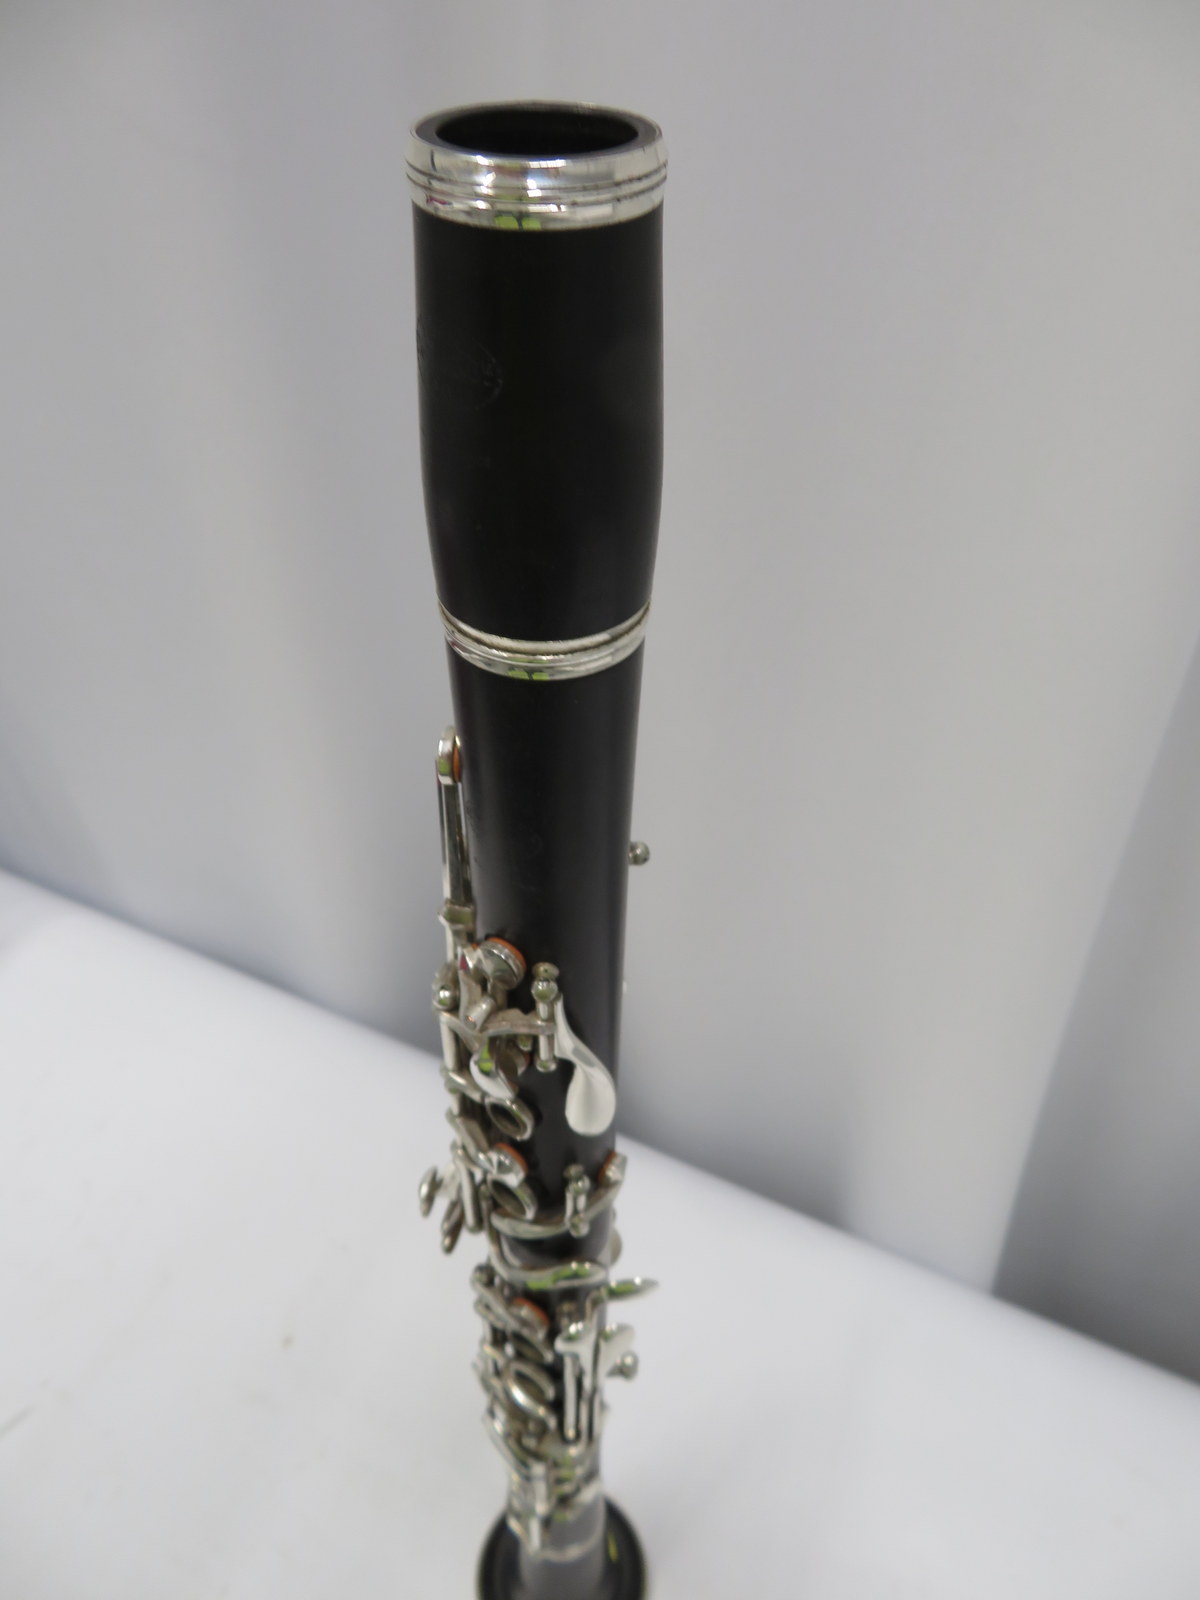 Buffet Crampon R13 clarinet with case. Serial number: 524961. - Image 5 of 17